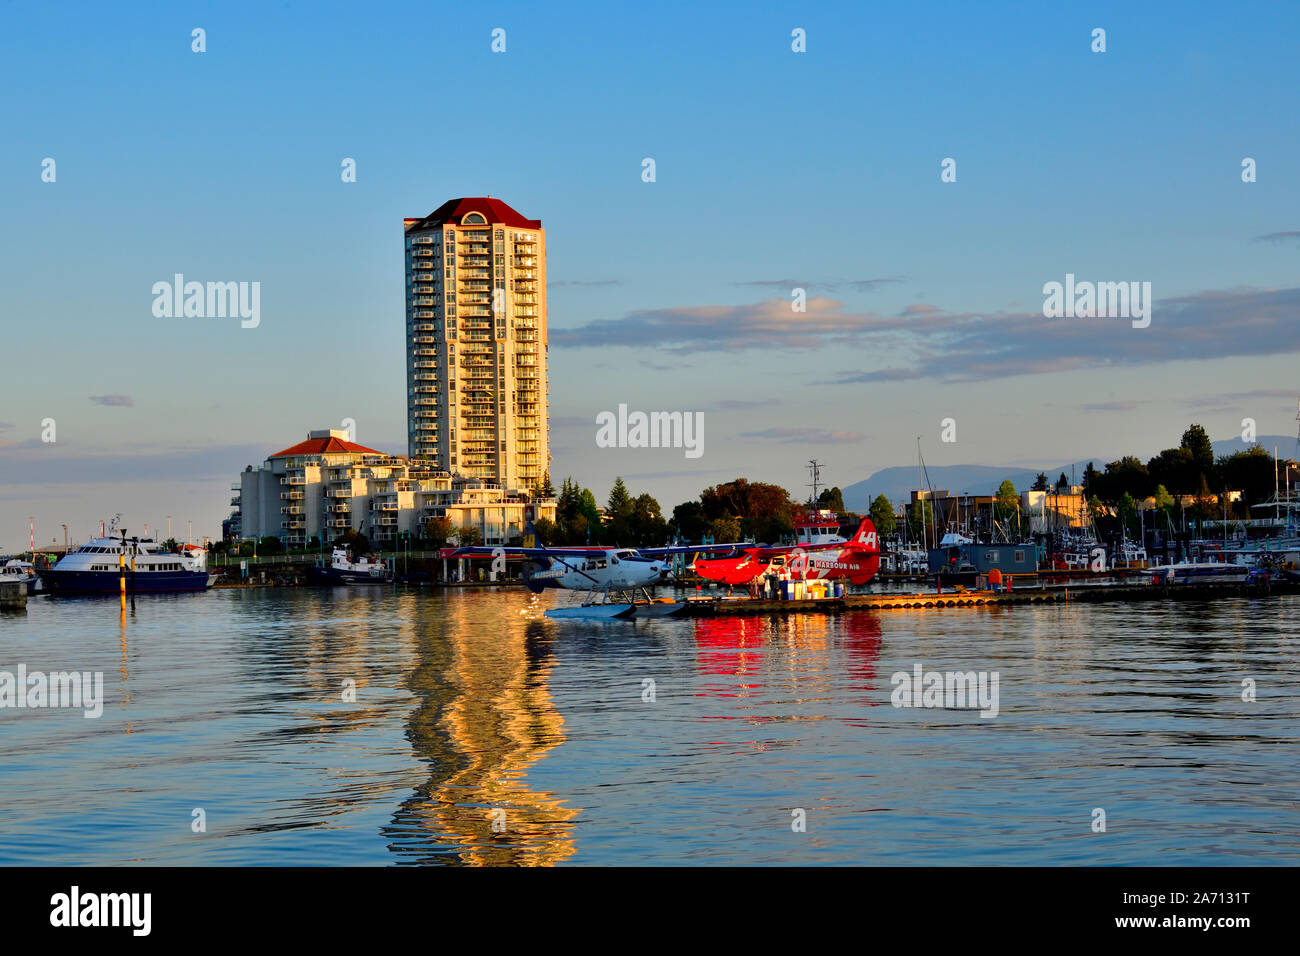 A landscape view in Nanaimo harbour with the airplane dock and tall condo buildings in the background Stock Photo